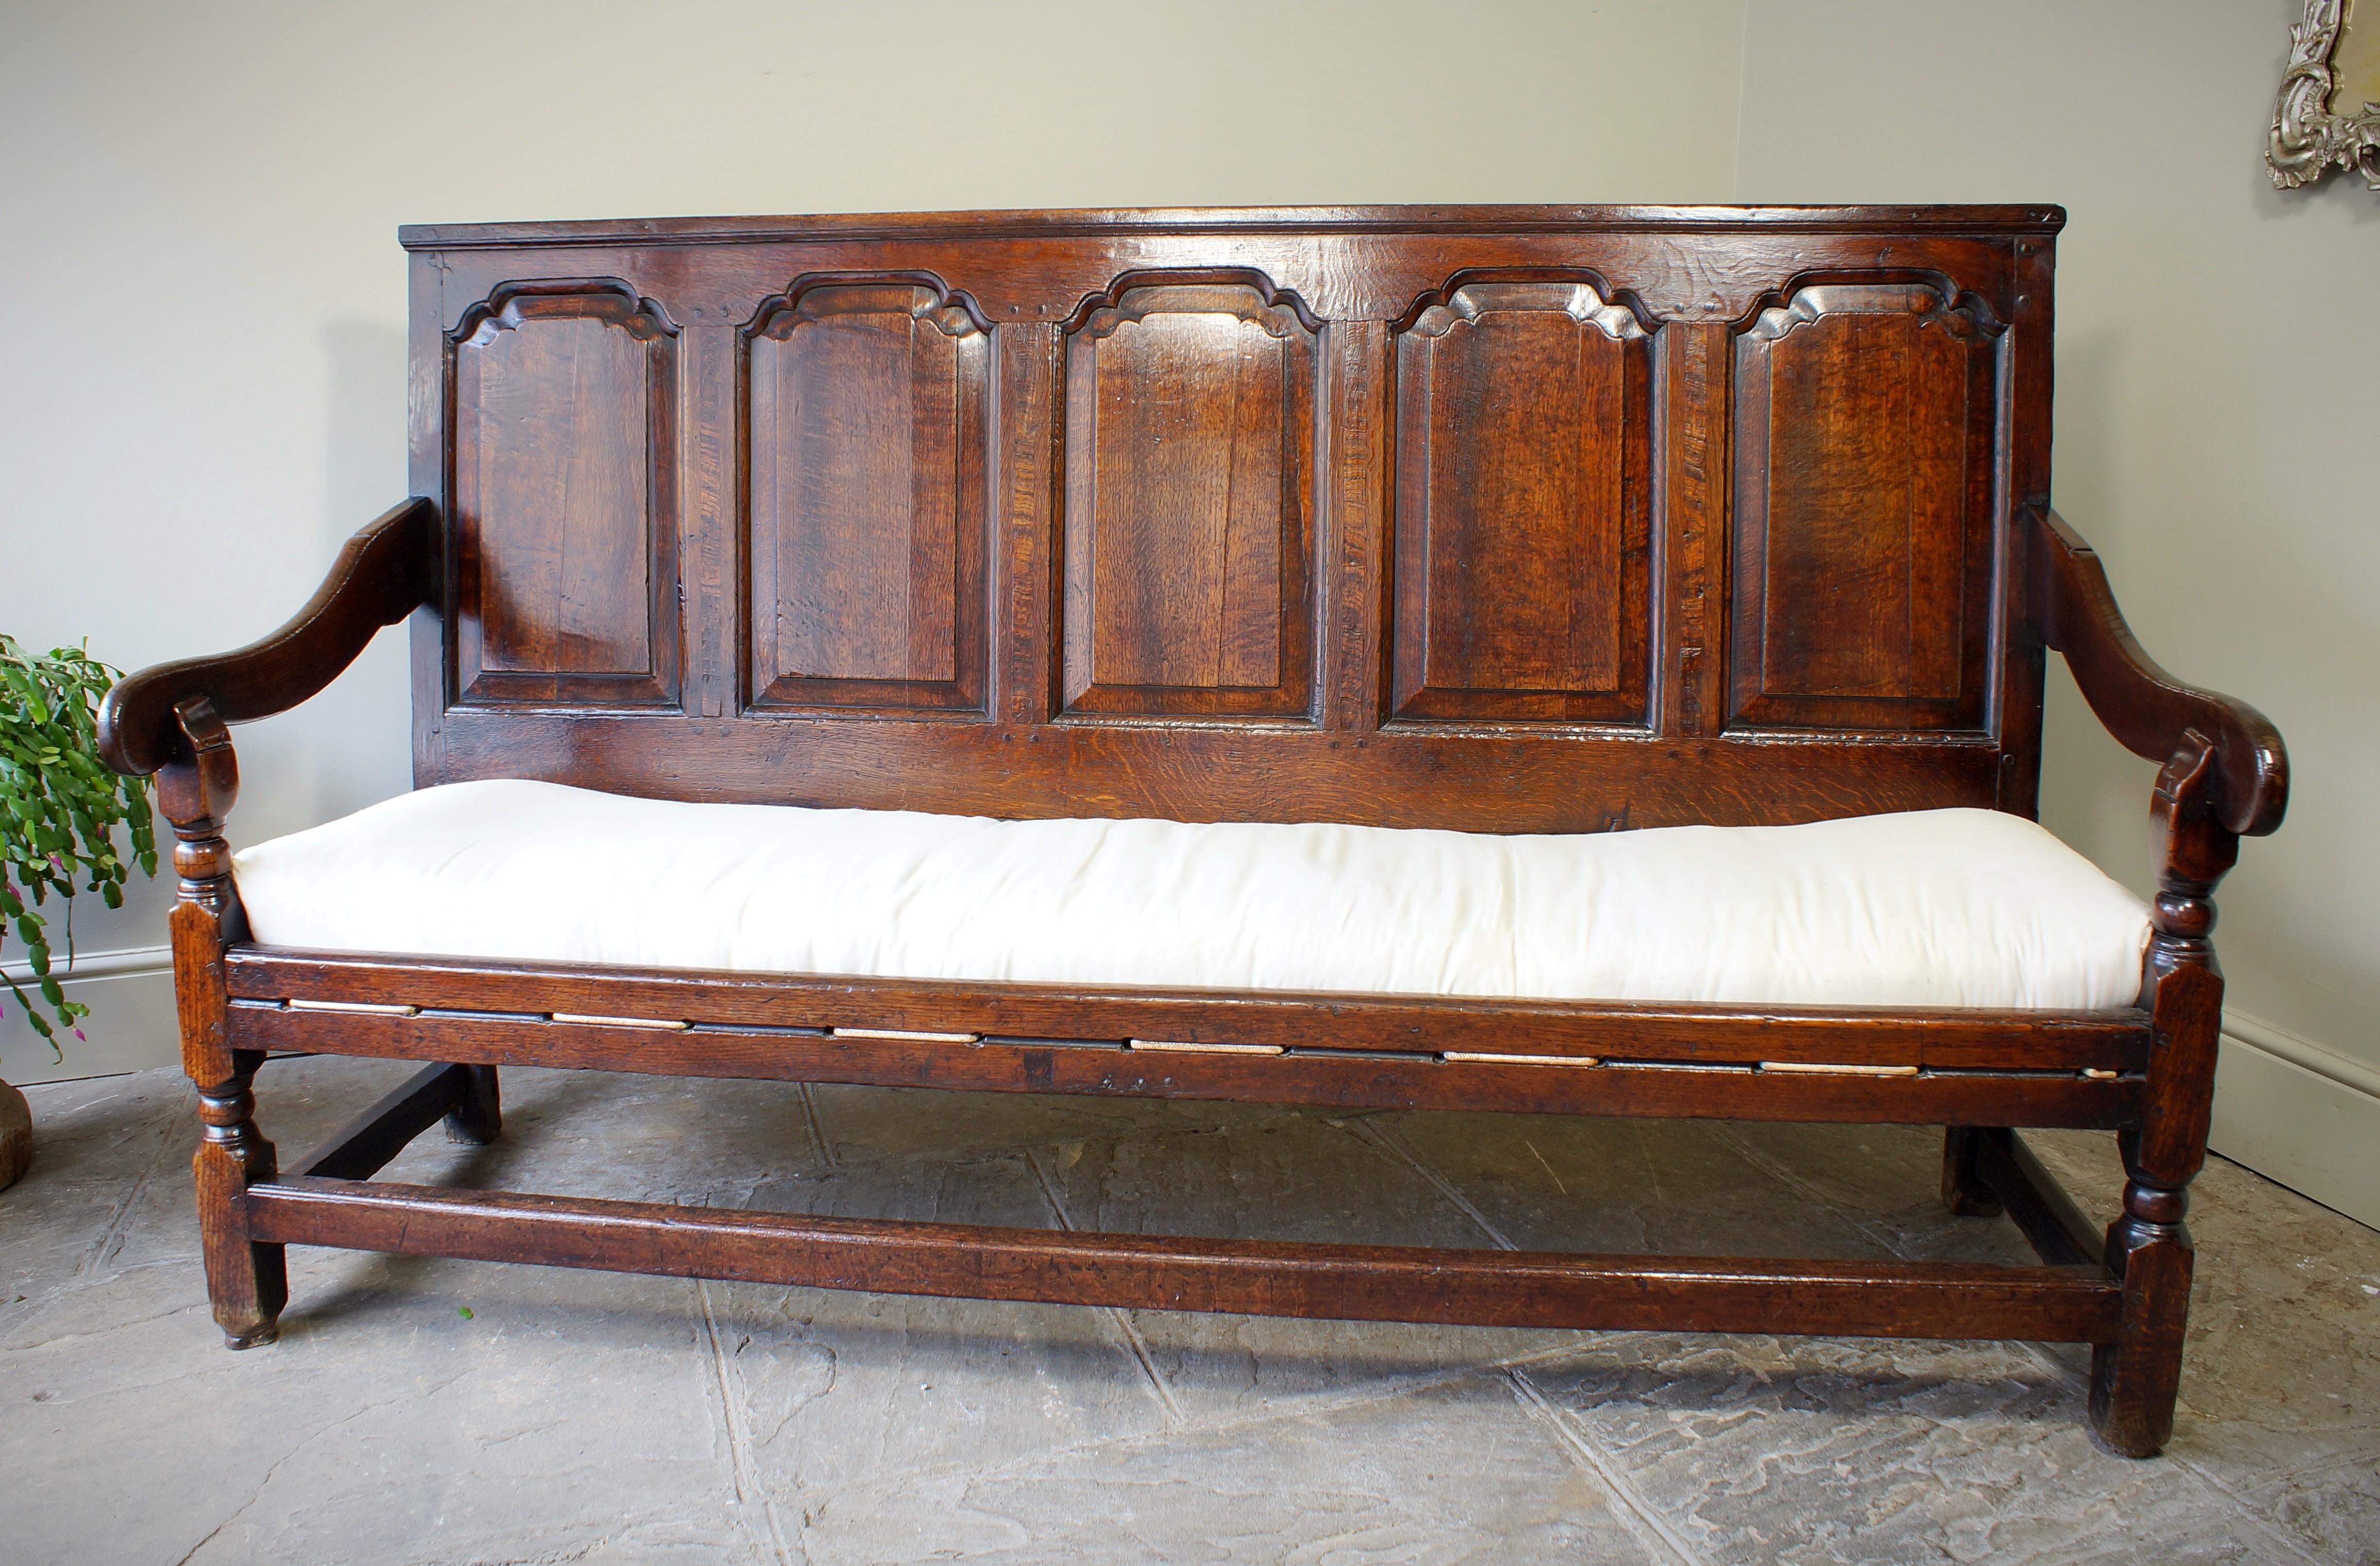 Early 18th Century Oak Settle in very good original condition, retaining all the original rails , arms and legs. Having the original front and side stretchers, the rear one is missing but this doesn't affect the overall stability of the